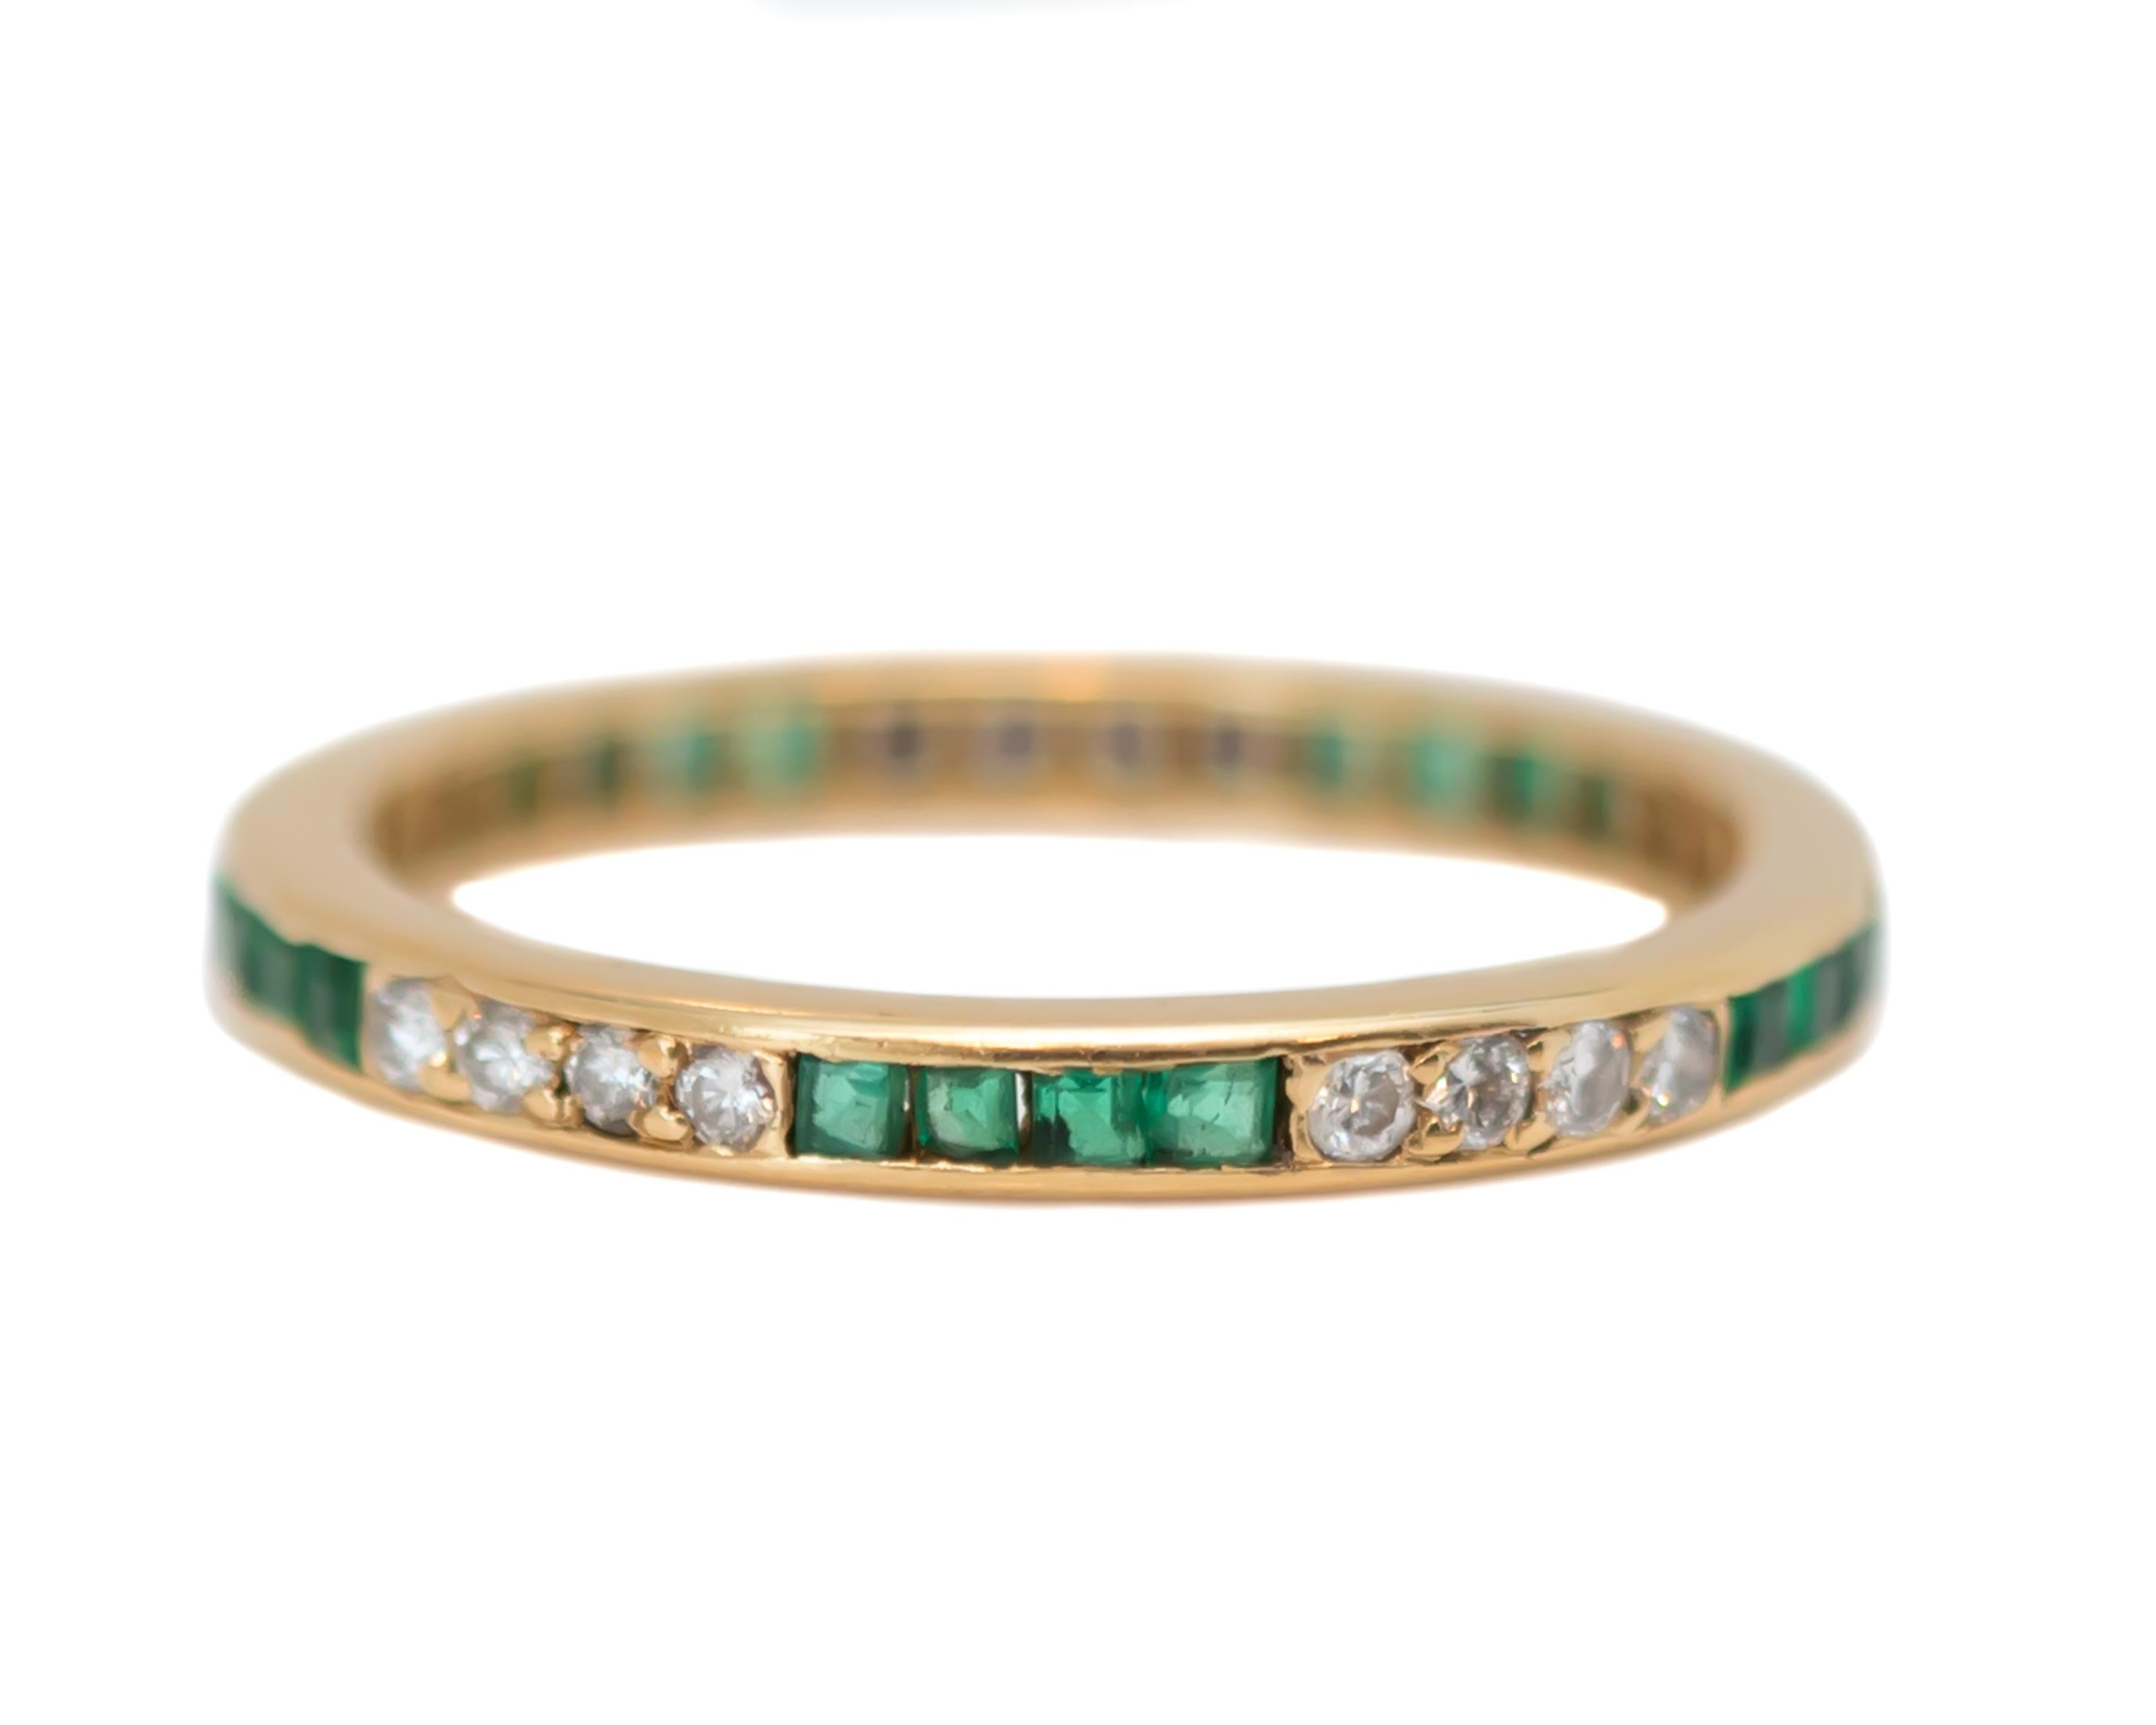 1950s Retro Emerald Eternity Band - 18 Karat Yellow Gold, Colombian Emeralds, Diamonds

Features:  
2.25 millimeter wide band 
0.25 carat total Channel set, square French cut Colombian Emeralds
0.25 carat total Prong set Round Brillant